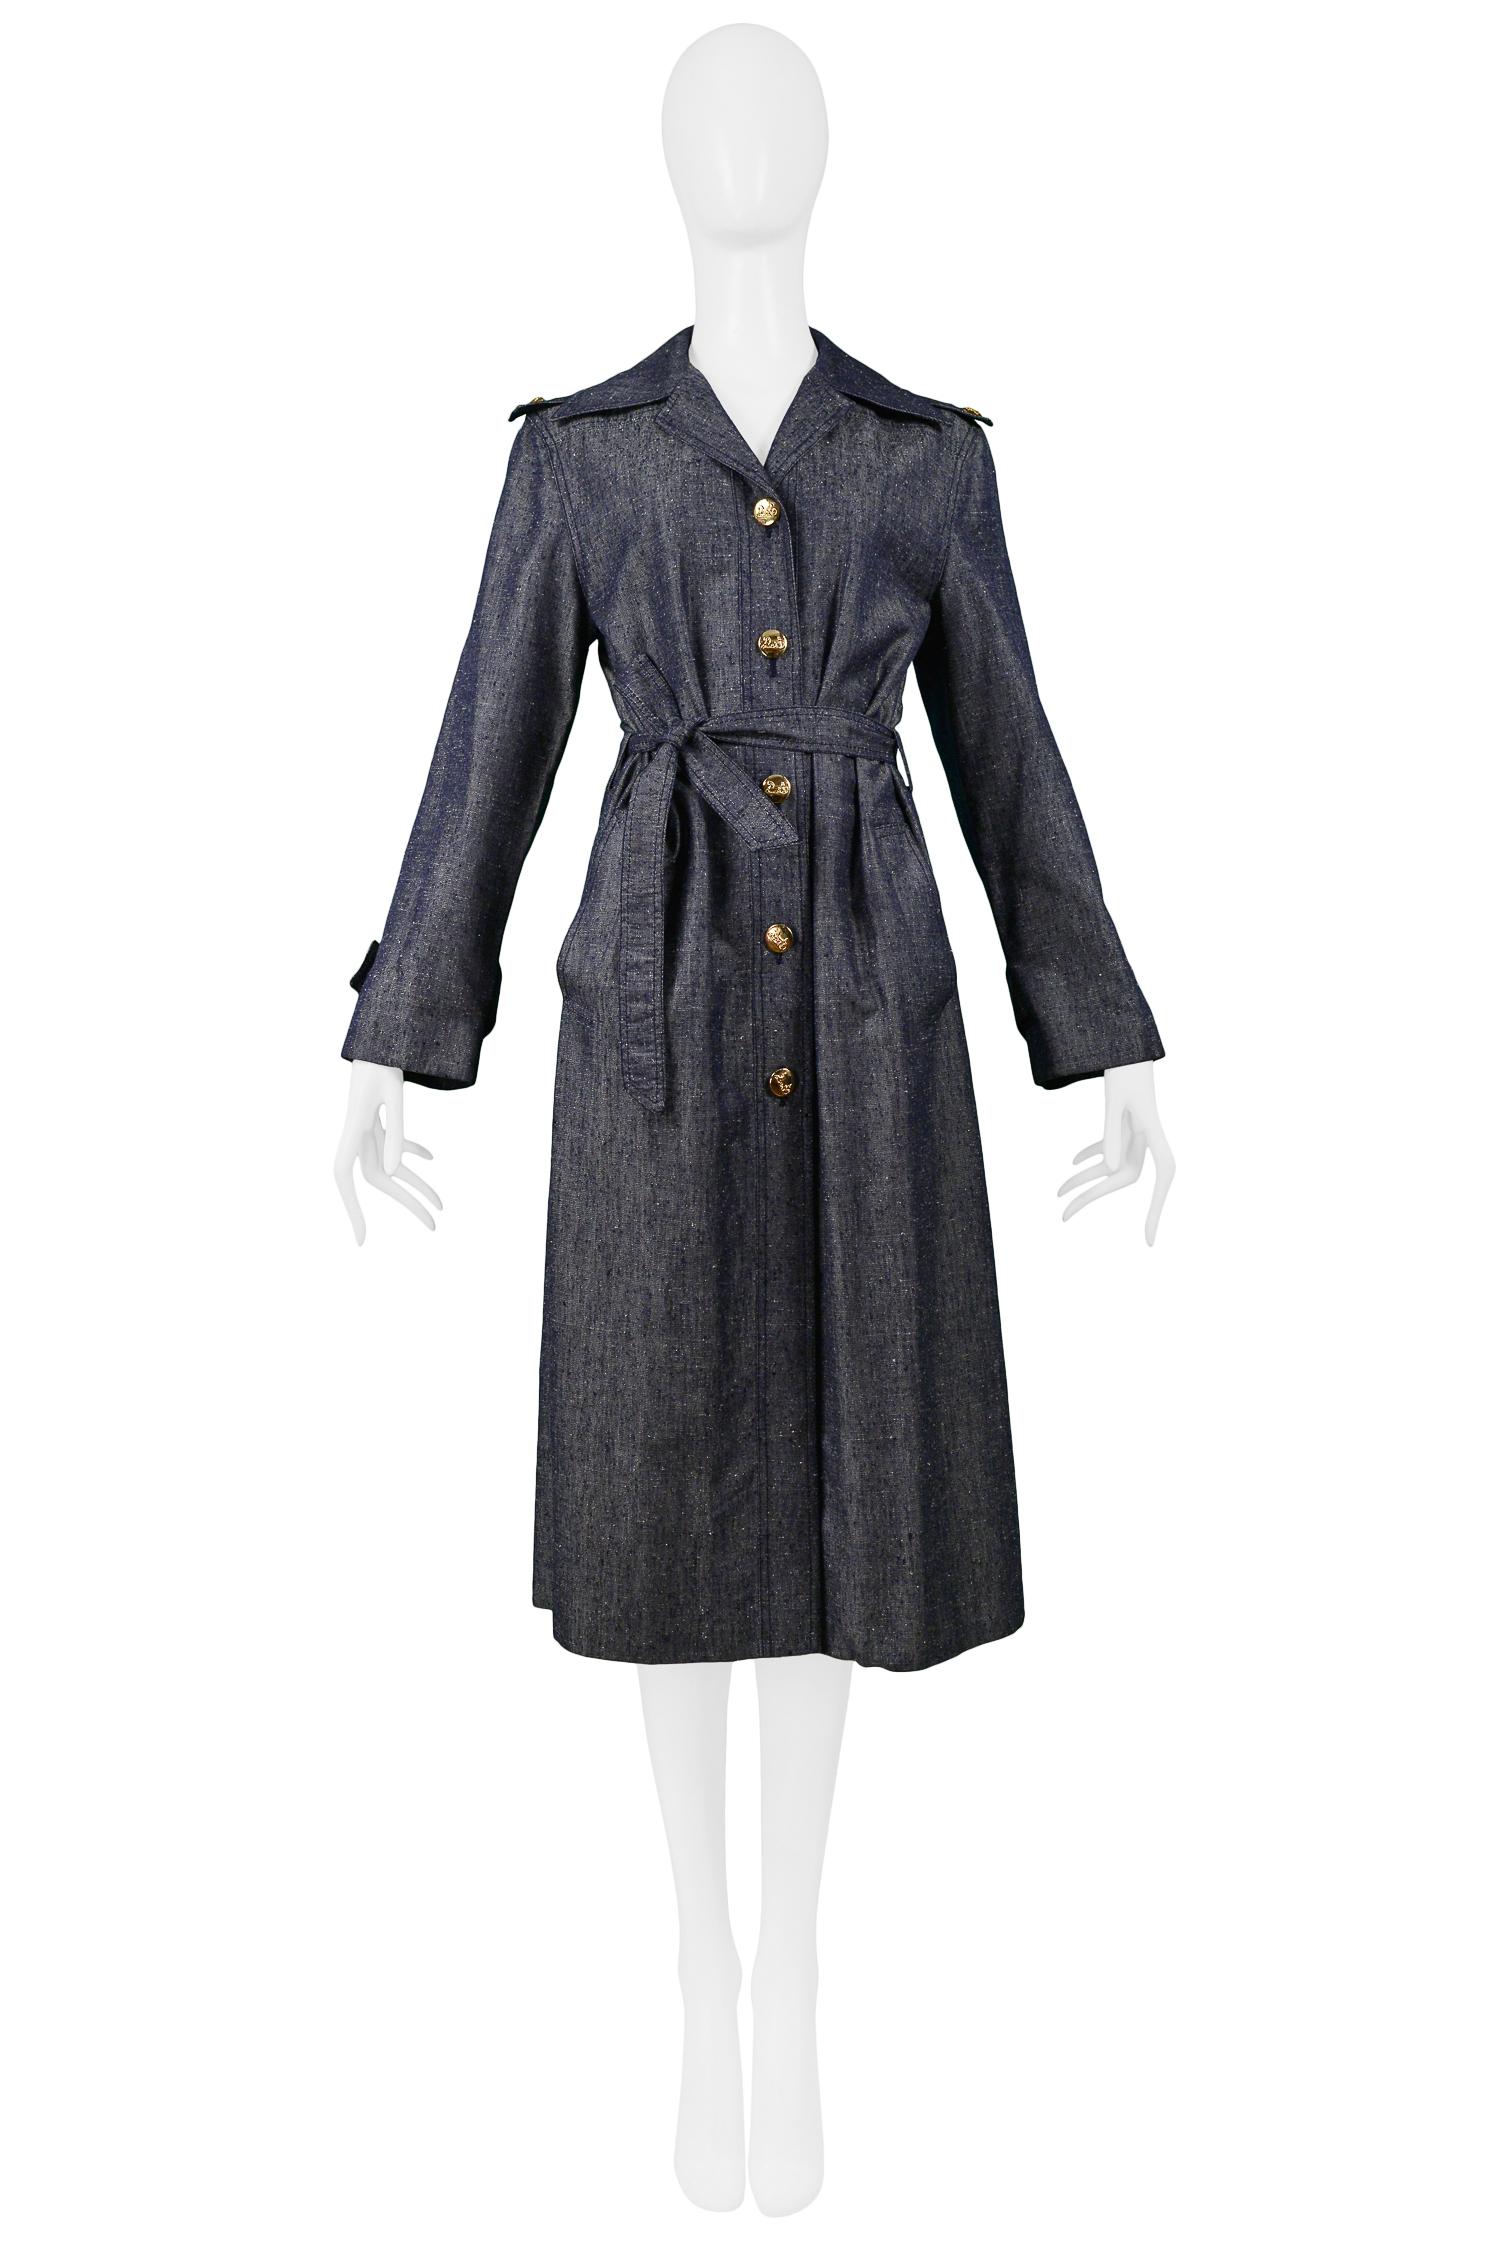 Vintage Celine Sport denim belted trench coat with gold tone buttons featuring the classic horse and carriage logo, epaulet detailing at shoulders and belted wrists. Circa 1970's.

Excellent Condition.

Size 40.